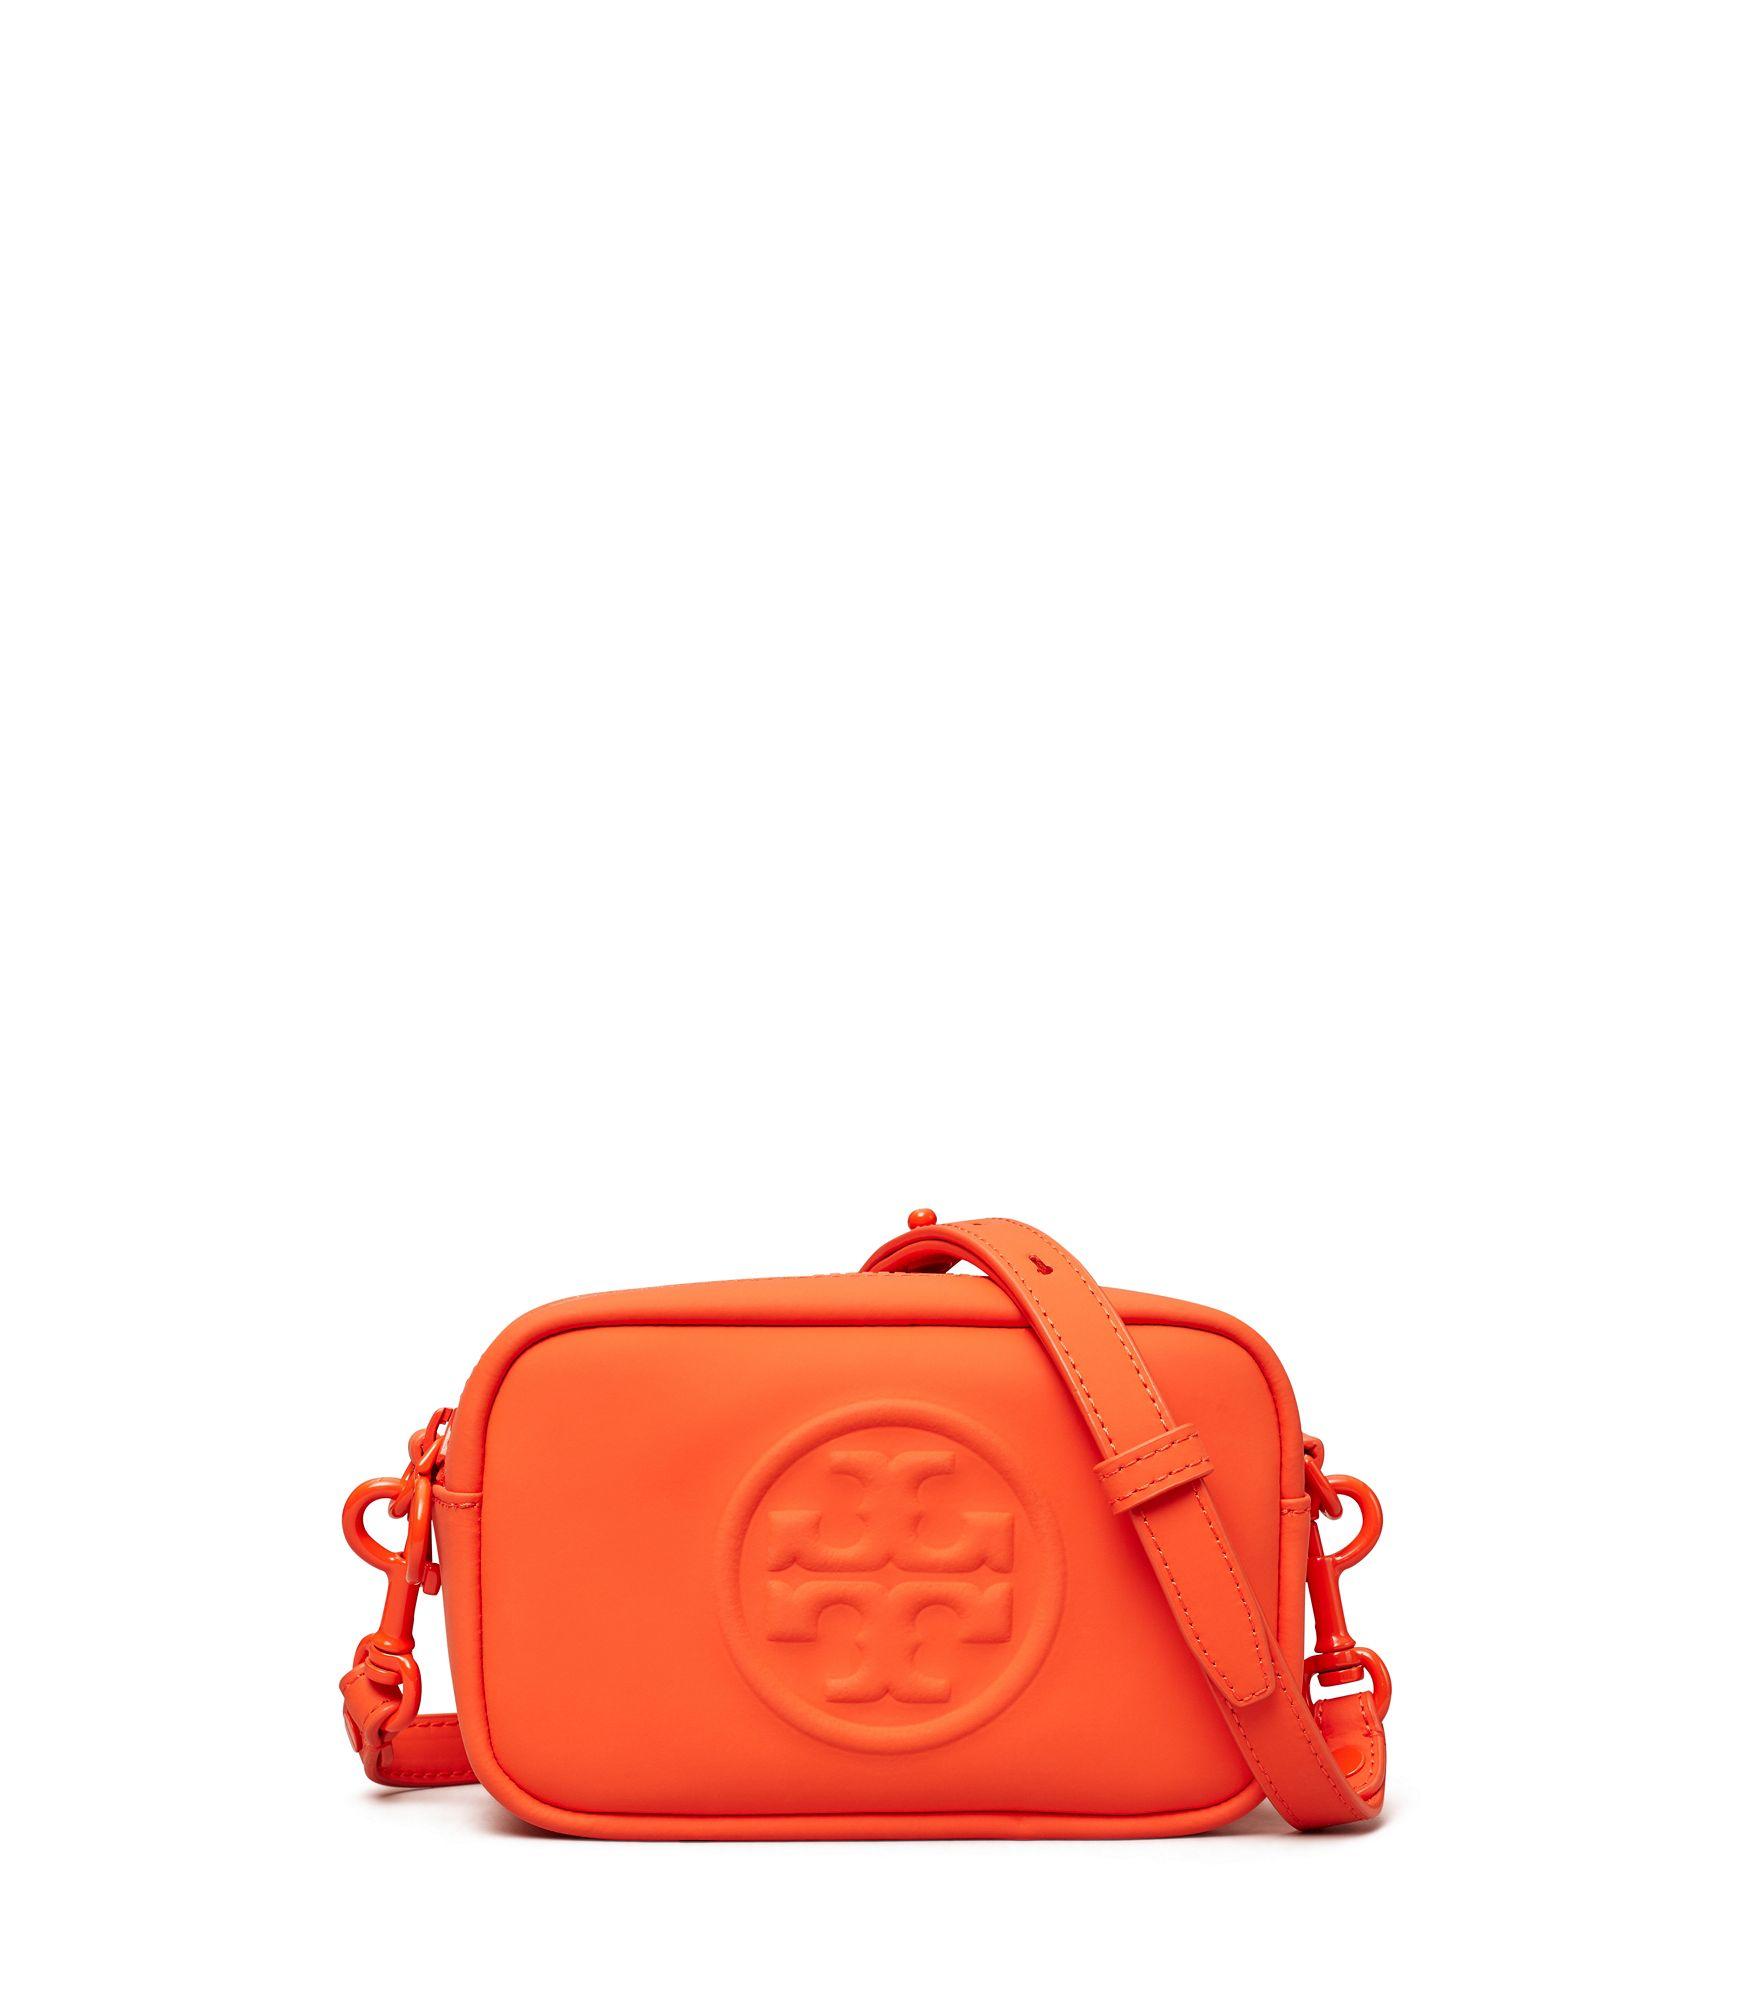 Tory Burch Leather Perry Bombe Matte Mini Bag in Orange - Lyst